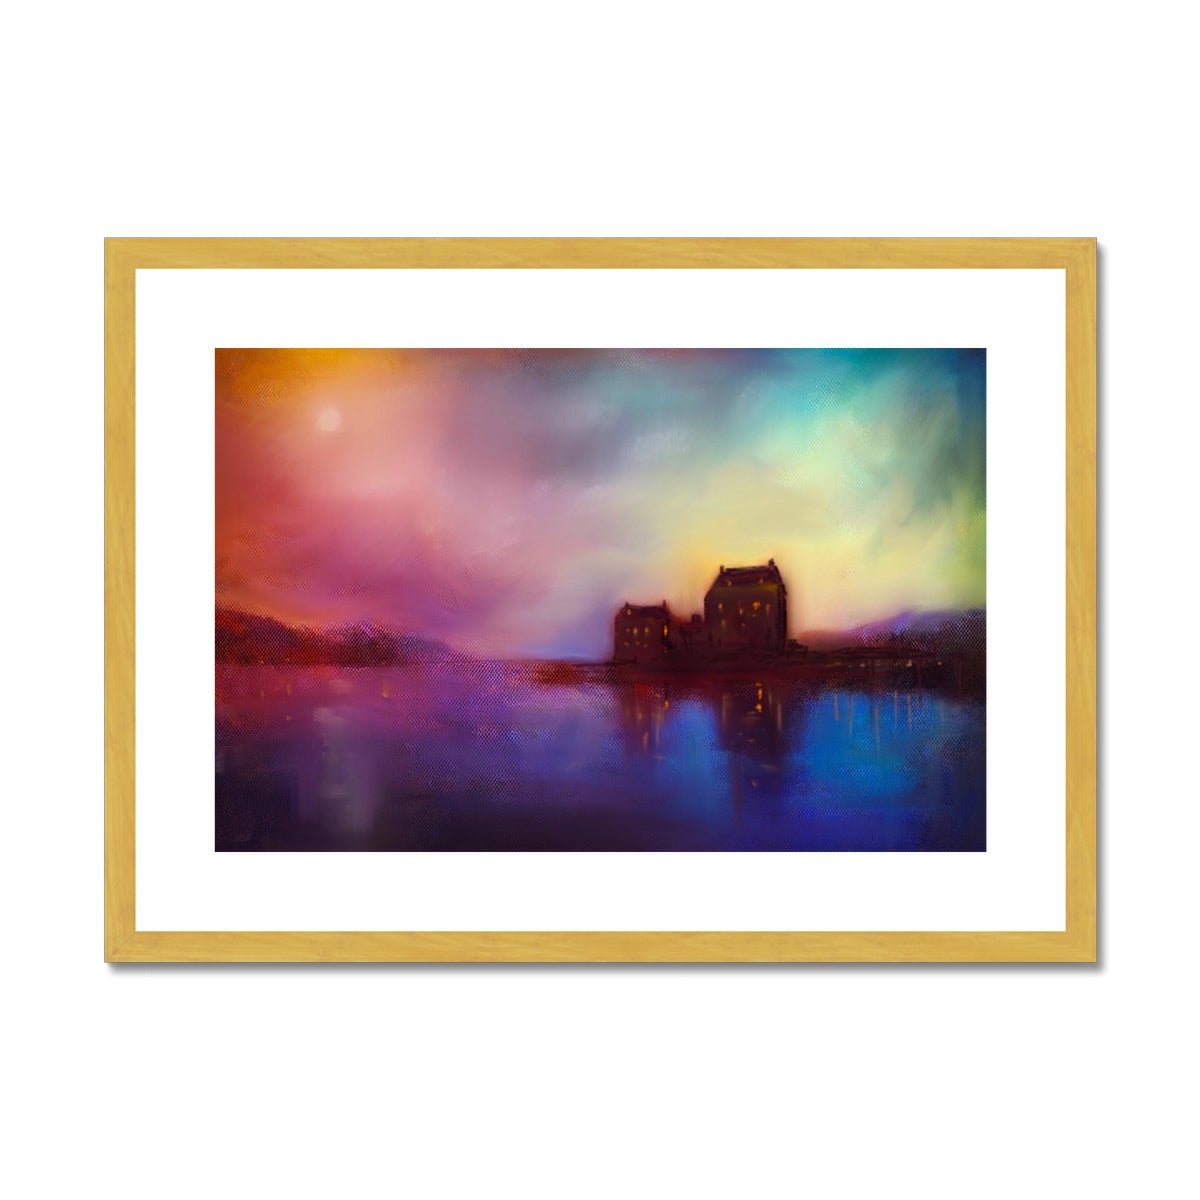 Eilean Donan Castle Sunset Painting | Antique Framed & Mounted Prints From Scotland-Antique Framed & Mounted Prints-Scottish Castles Art Gallery-A2 Landscape-Gold Frame-Paintings, Prints, Homeware, Art Gifts From Scotland By Scottish Artist Kevin Hunter